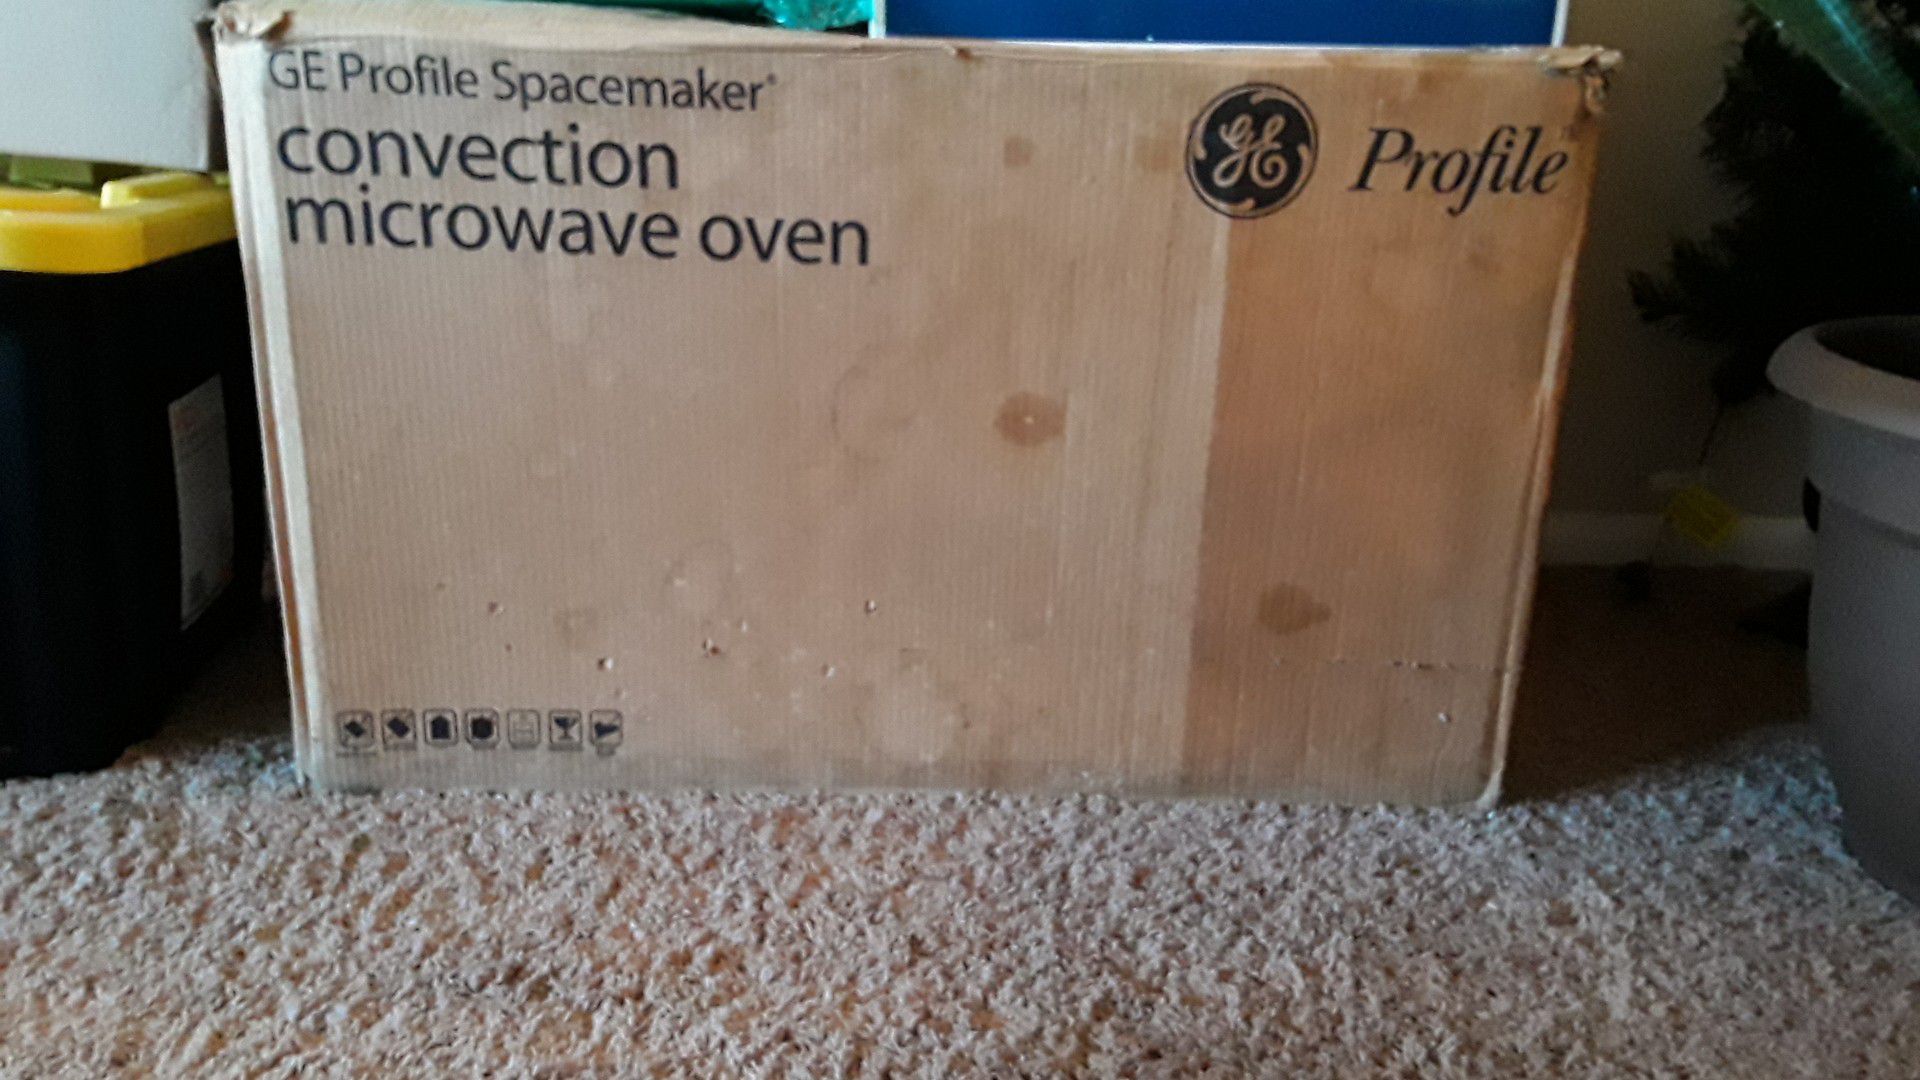 GE profile spacemaker conventional microwave oven brand new never used